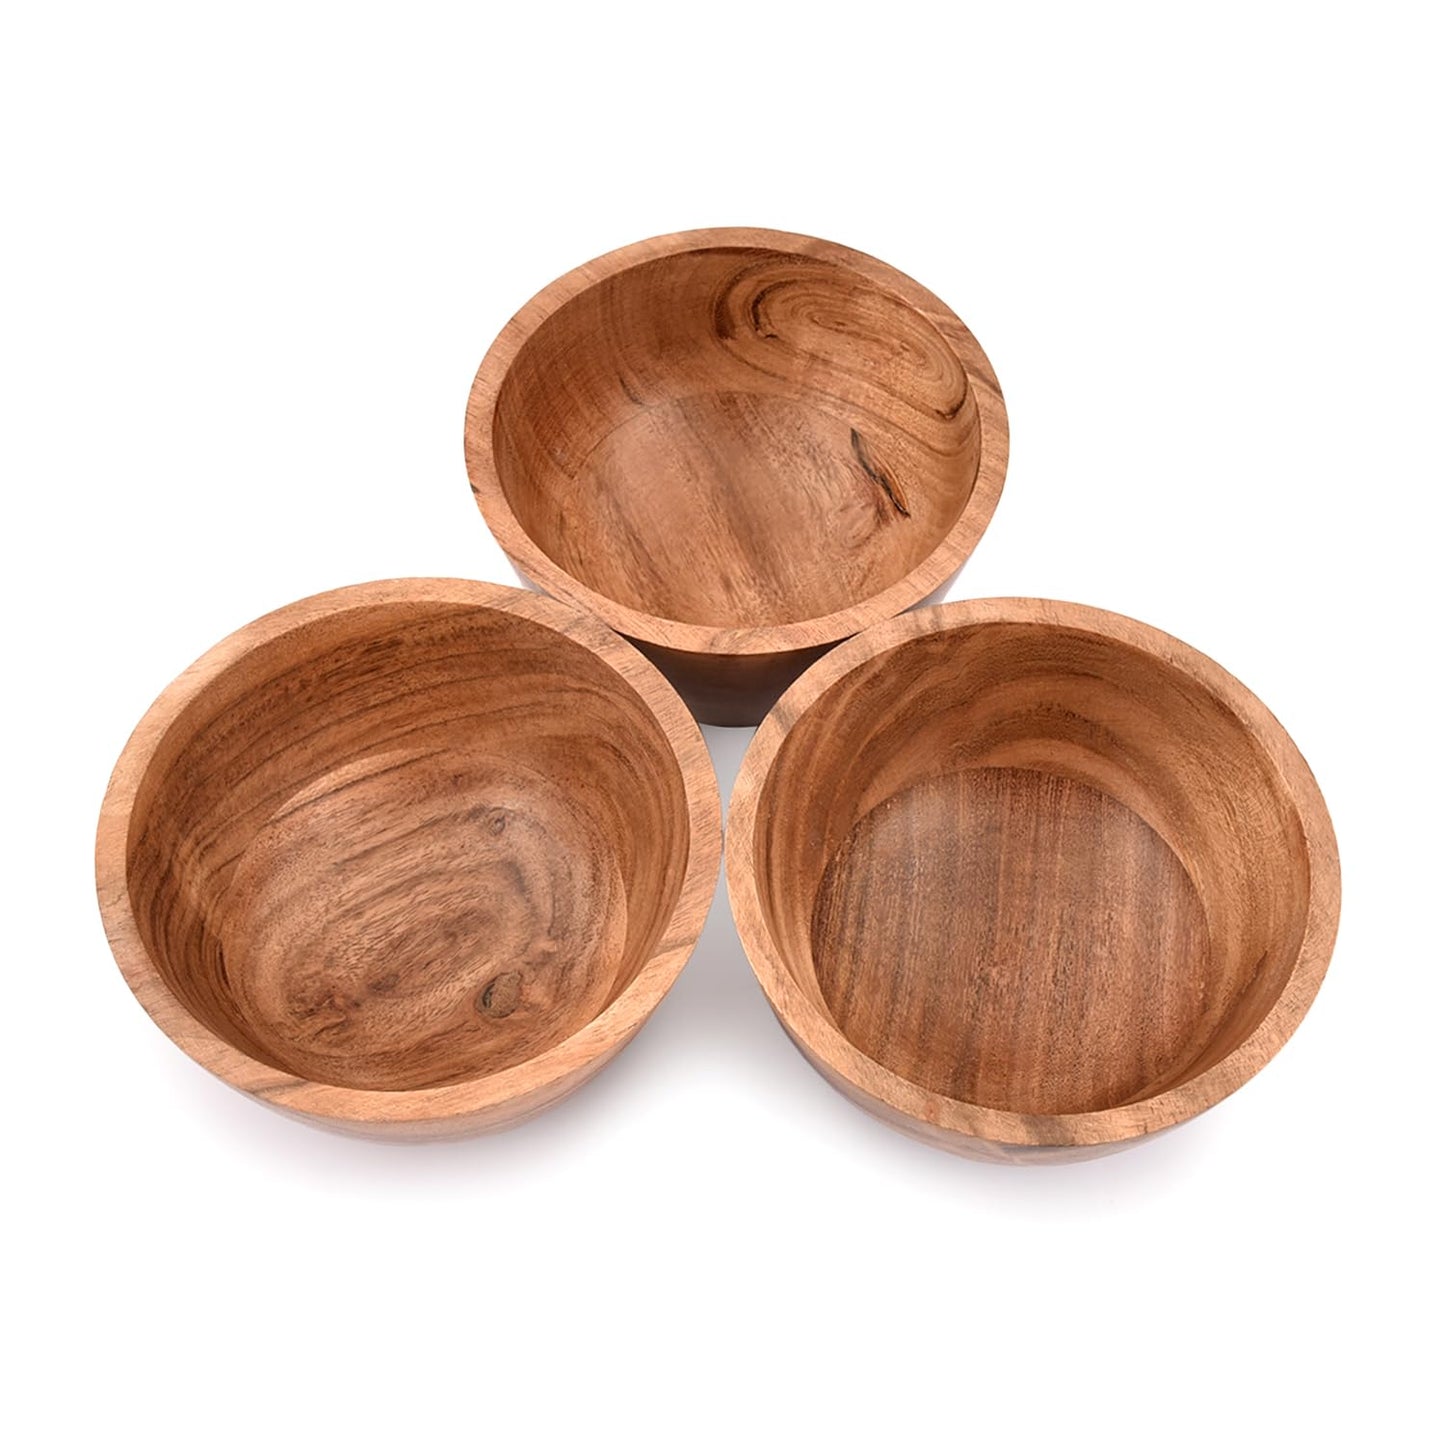 EDHAS Handmade Acacia Wood Bowl Set of 3 For Nuts, Candy, Appetizer, Snacks, Olive and Salsa Ideal for Dinner Parties & Family Gatherings (5" x 5" X